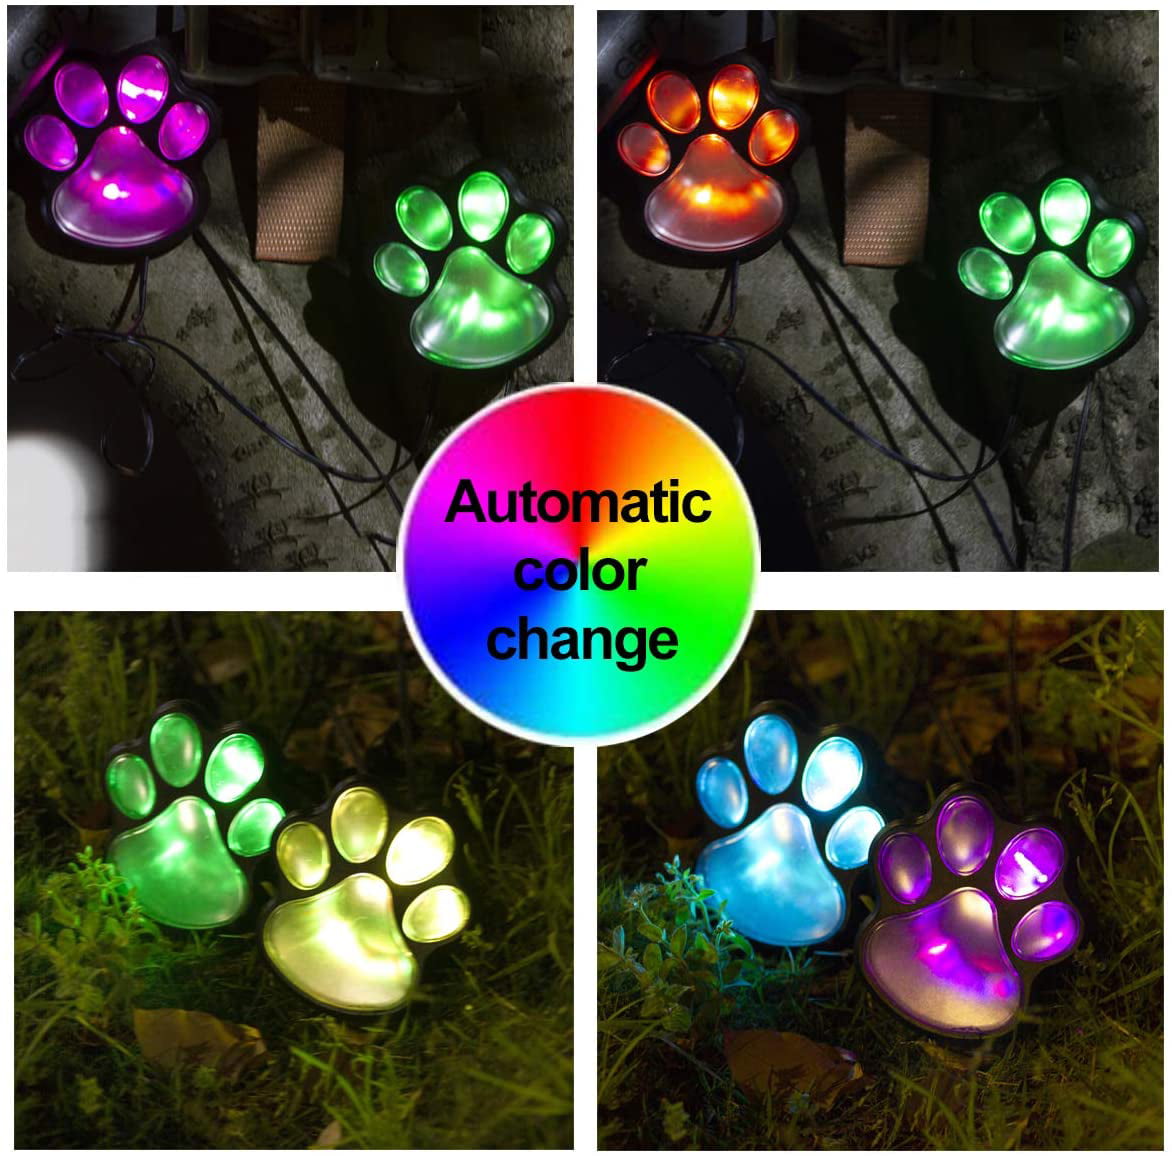 Set of 4 Dog,Cat,Puppy Animal Garden Lights Paw Lamp for Pathway,Lawn,Yard,Outdoor Decorations-Solar Paw White LED Paw Print Solar Lights